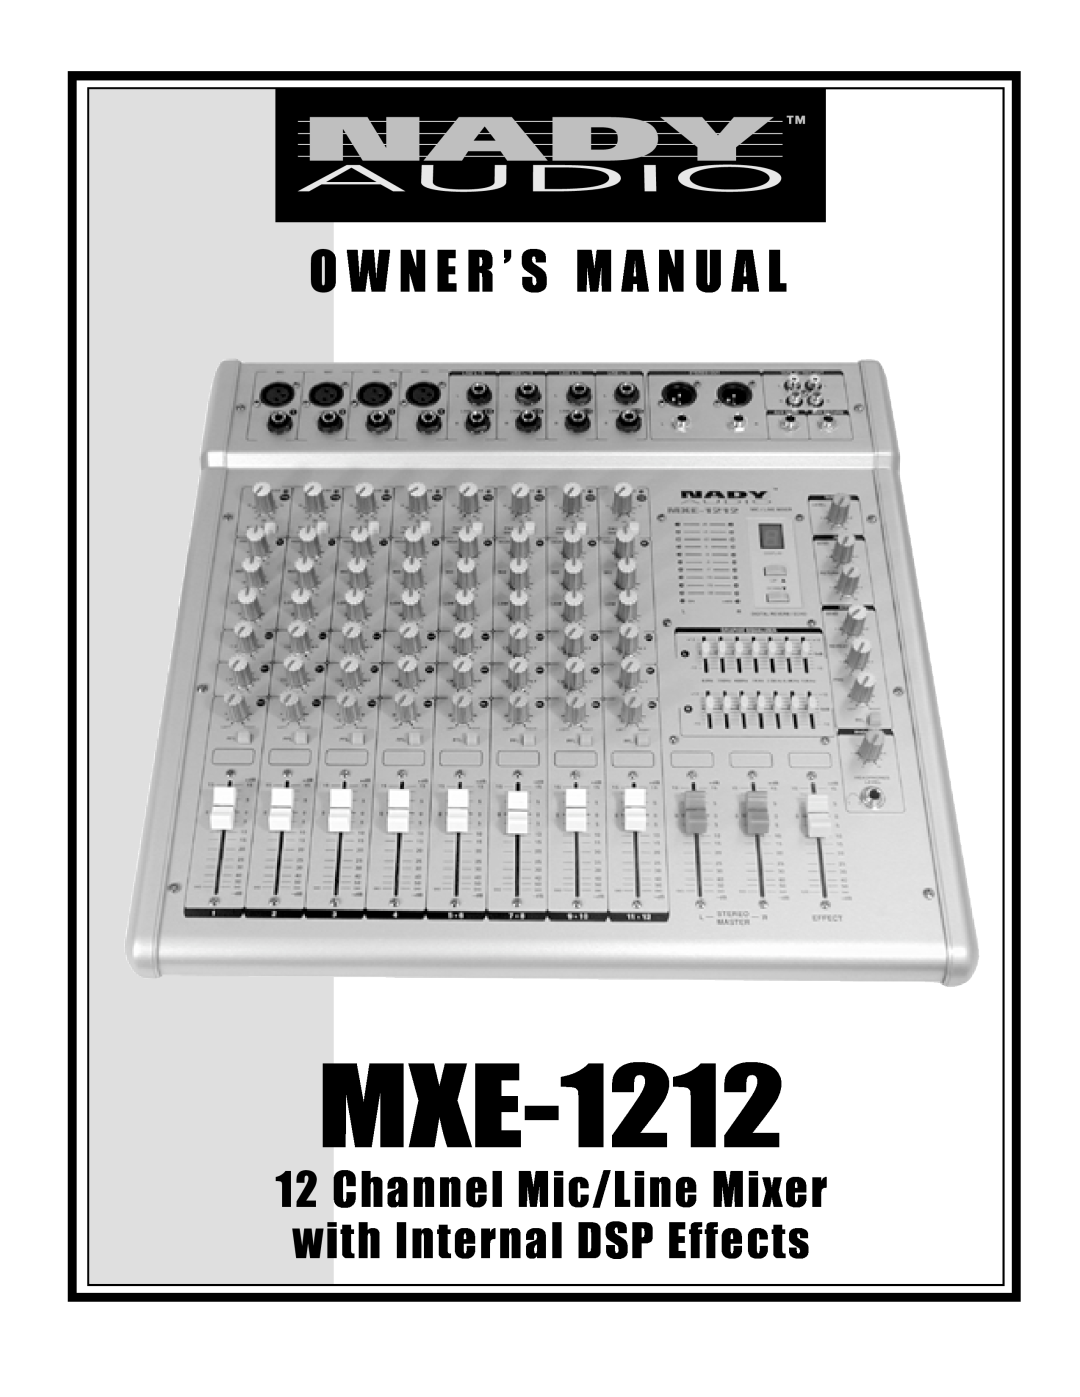 Nady Systems MXE-1212 owner manual O W N E R ’ S M A N U A L, Channel Mic/Line Mixer, with Internal DSP Effects 